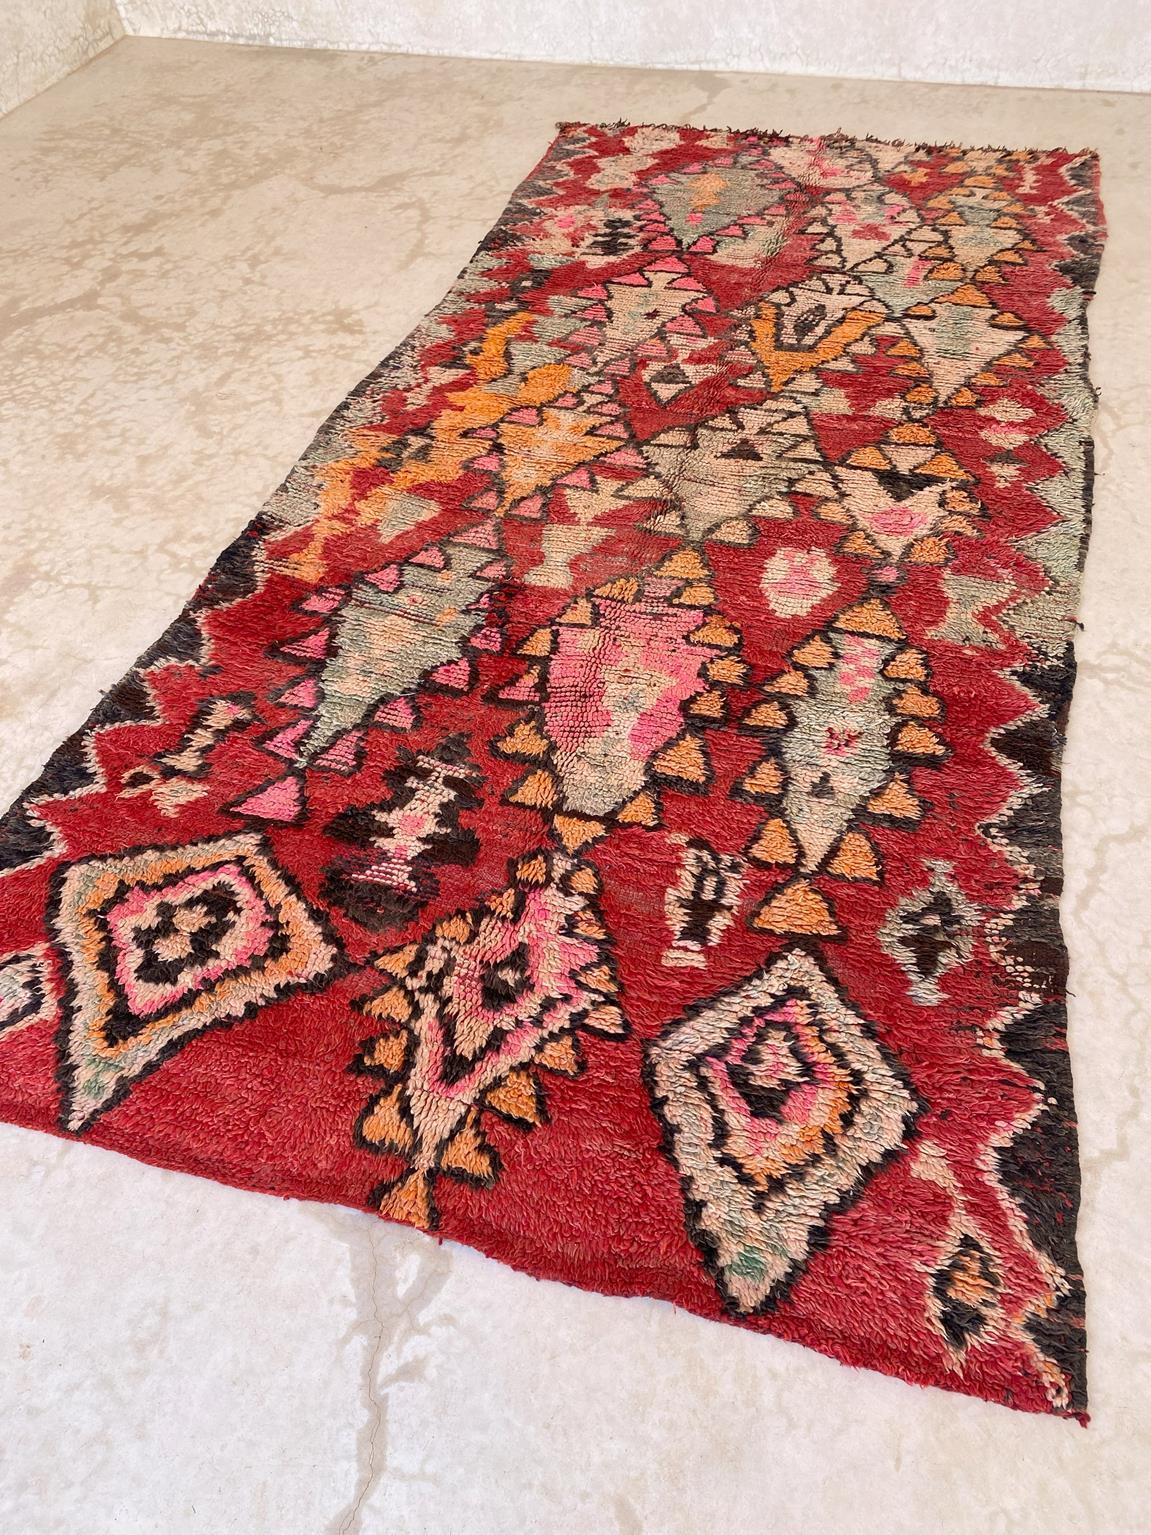 Vintage Moroccan Rehamna rug - Red/pink - 5.9x12.2feet / 180x373cm For Sale 7